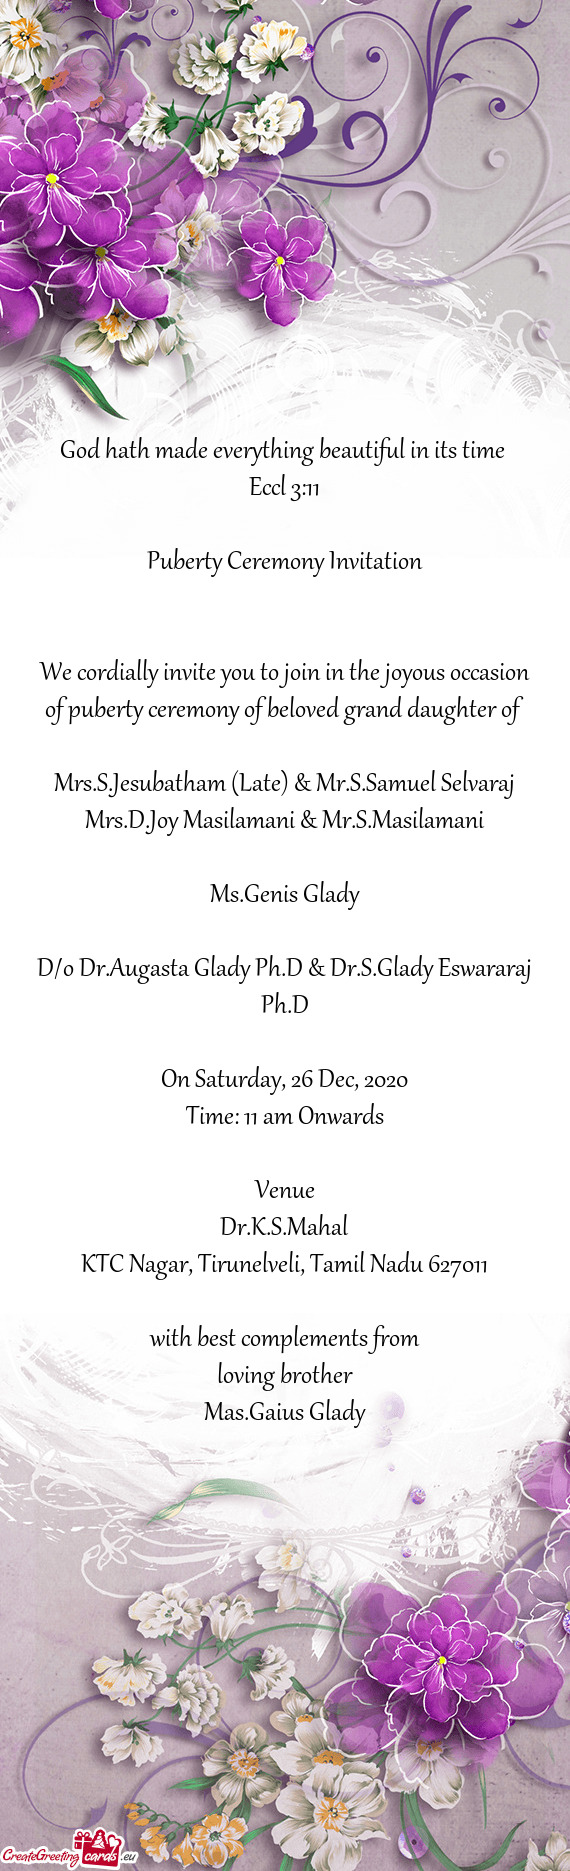 We cordially invite you to join in the joyous occasion of puberty ceremony of beloved grand daughter